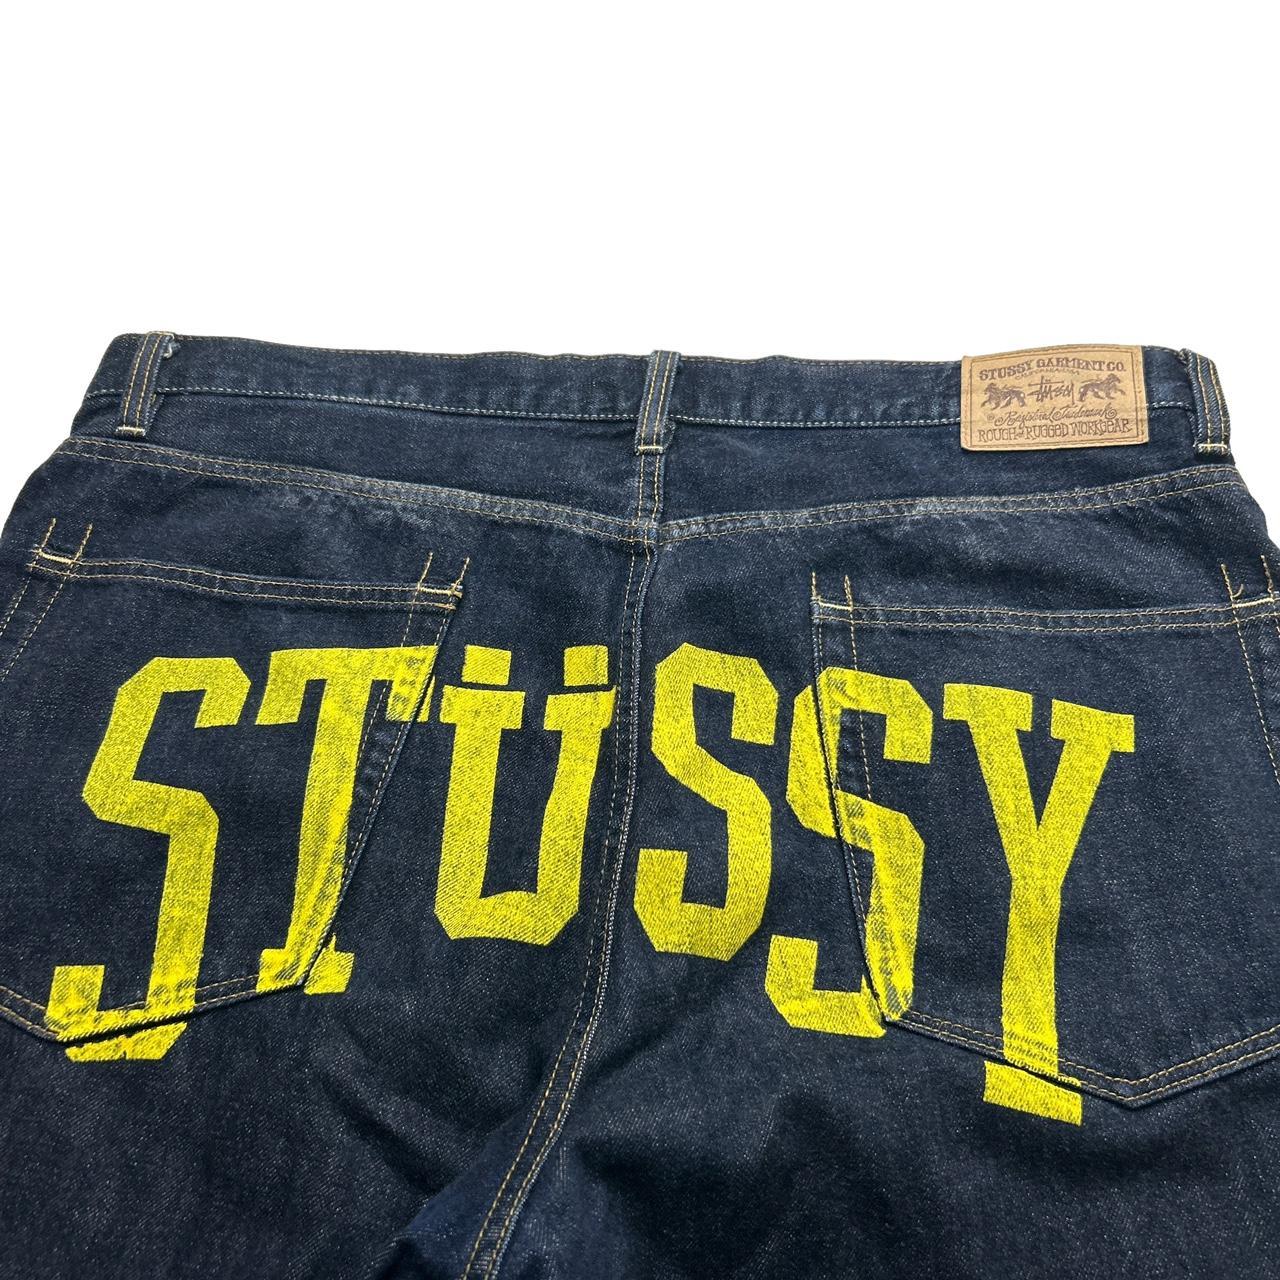 Stussy Spellout Jeans (38)